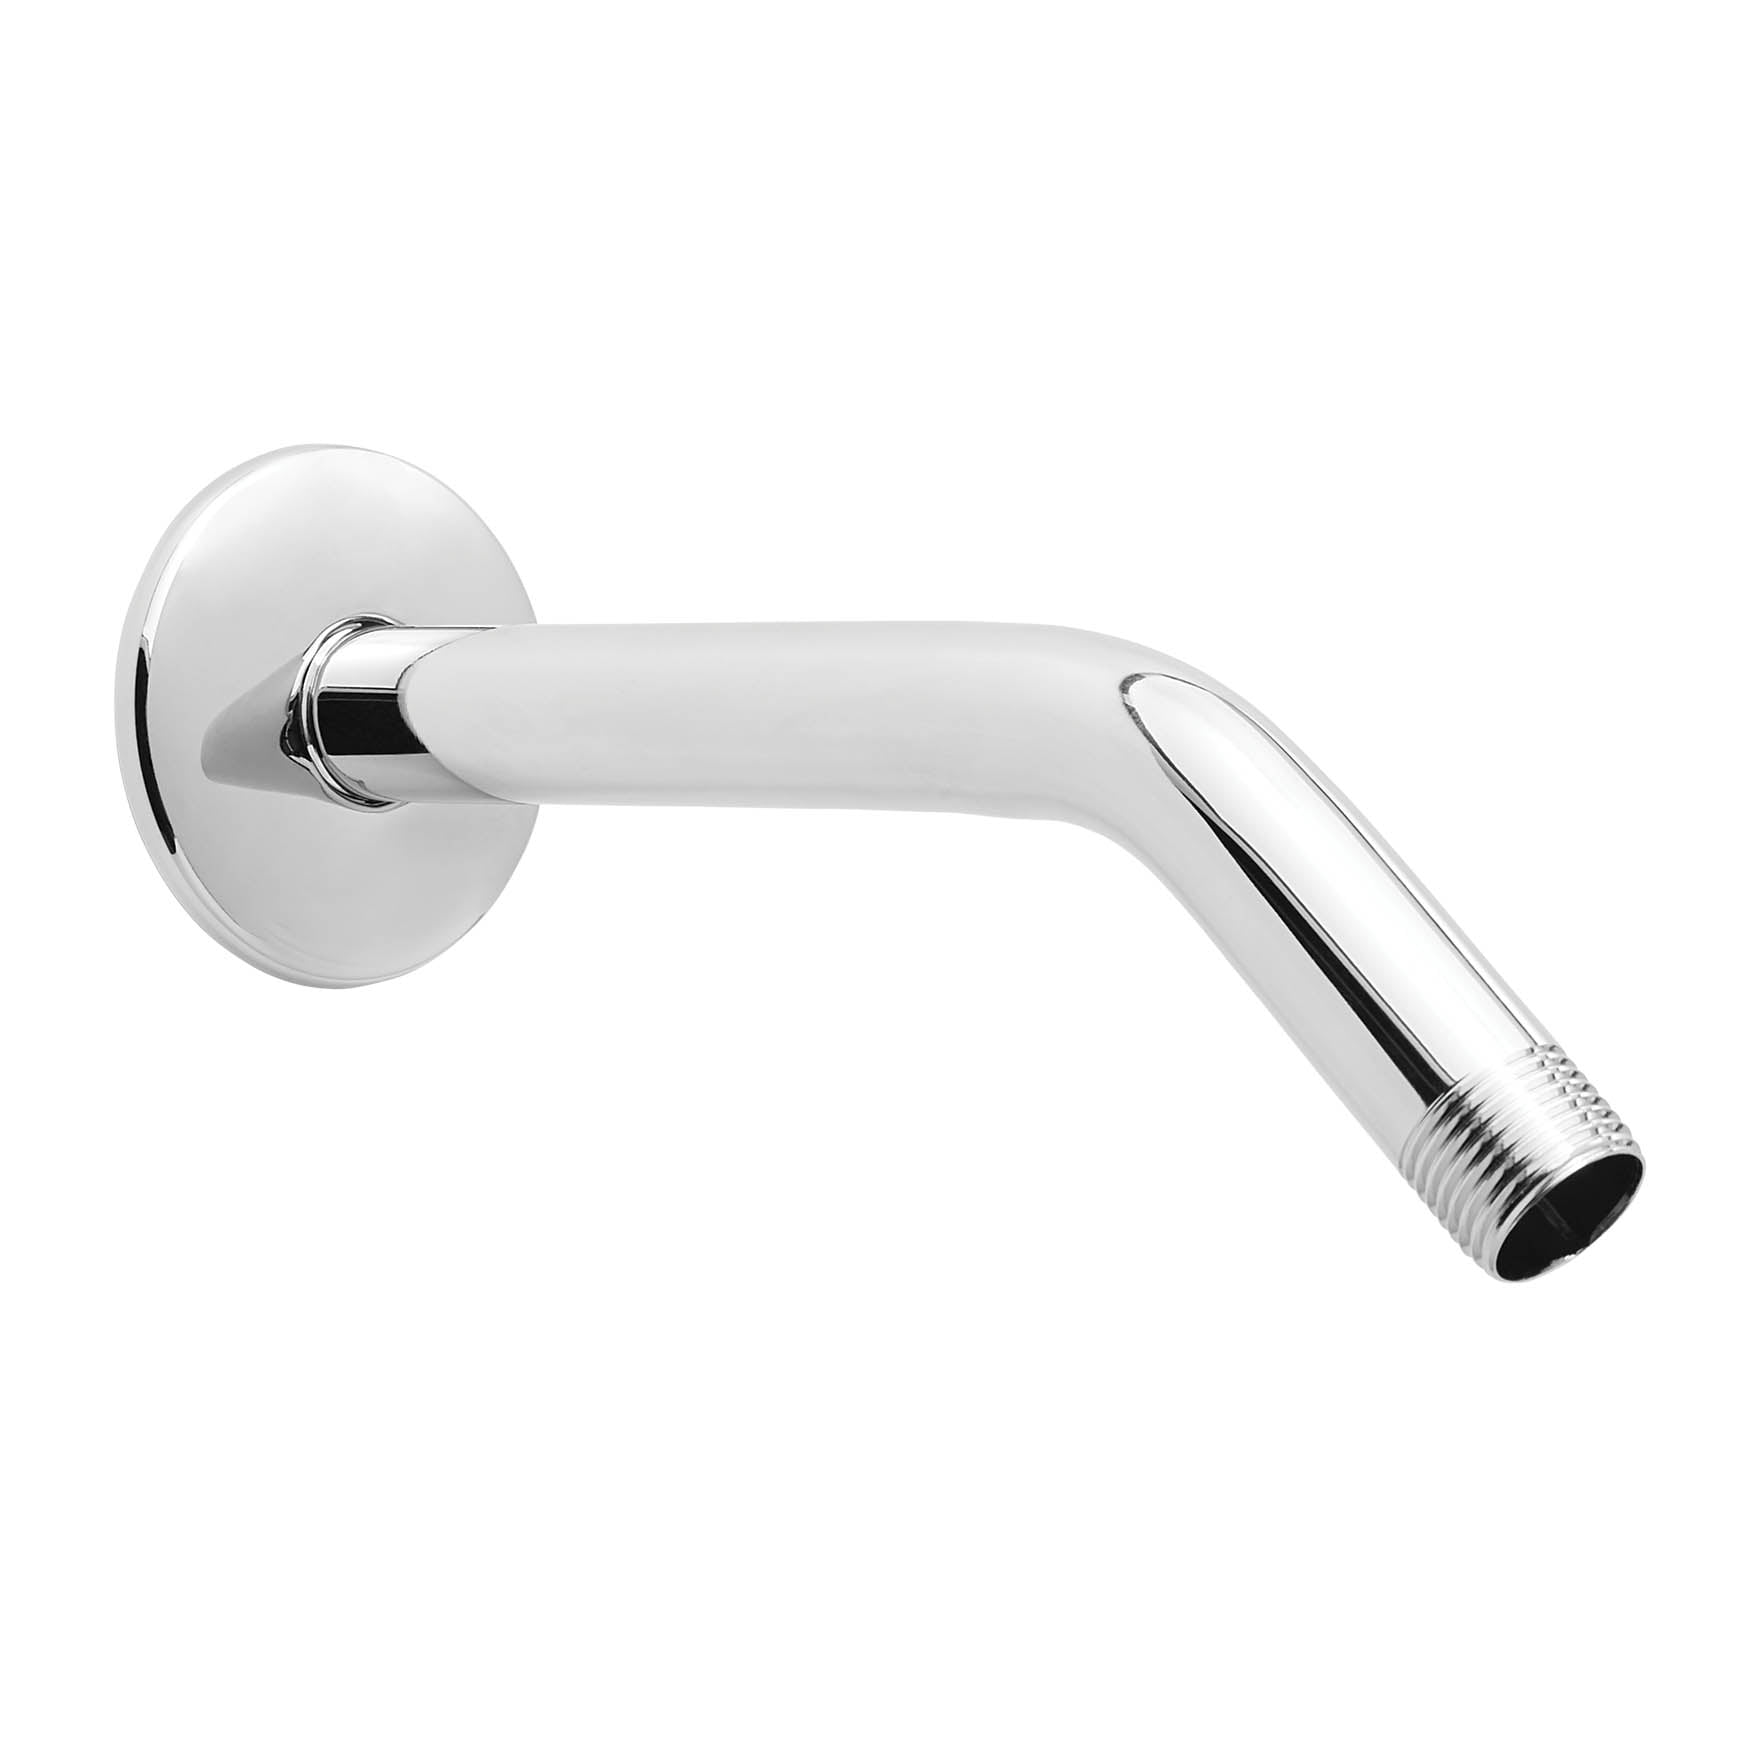 Mainstays 8-in Shower Arm and Flange, Stainless Steel Pipe, Chrome